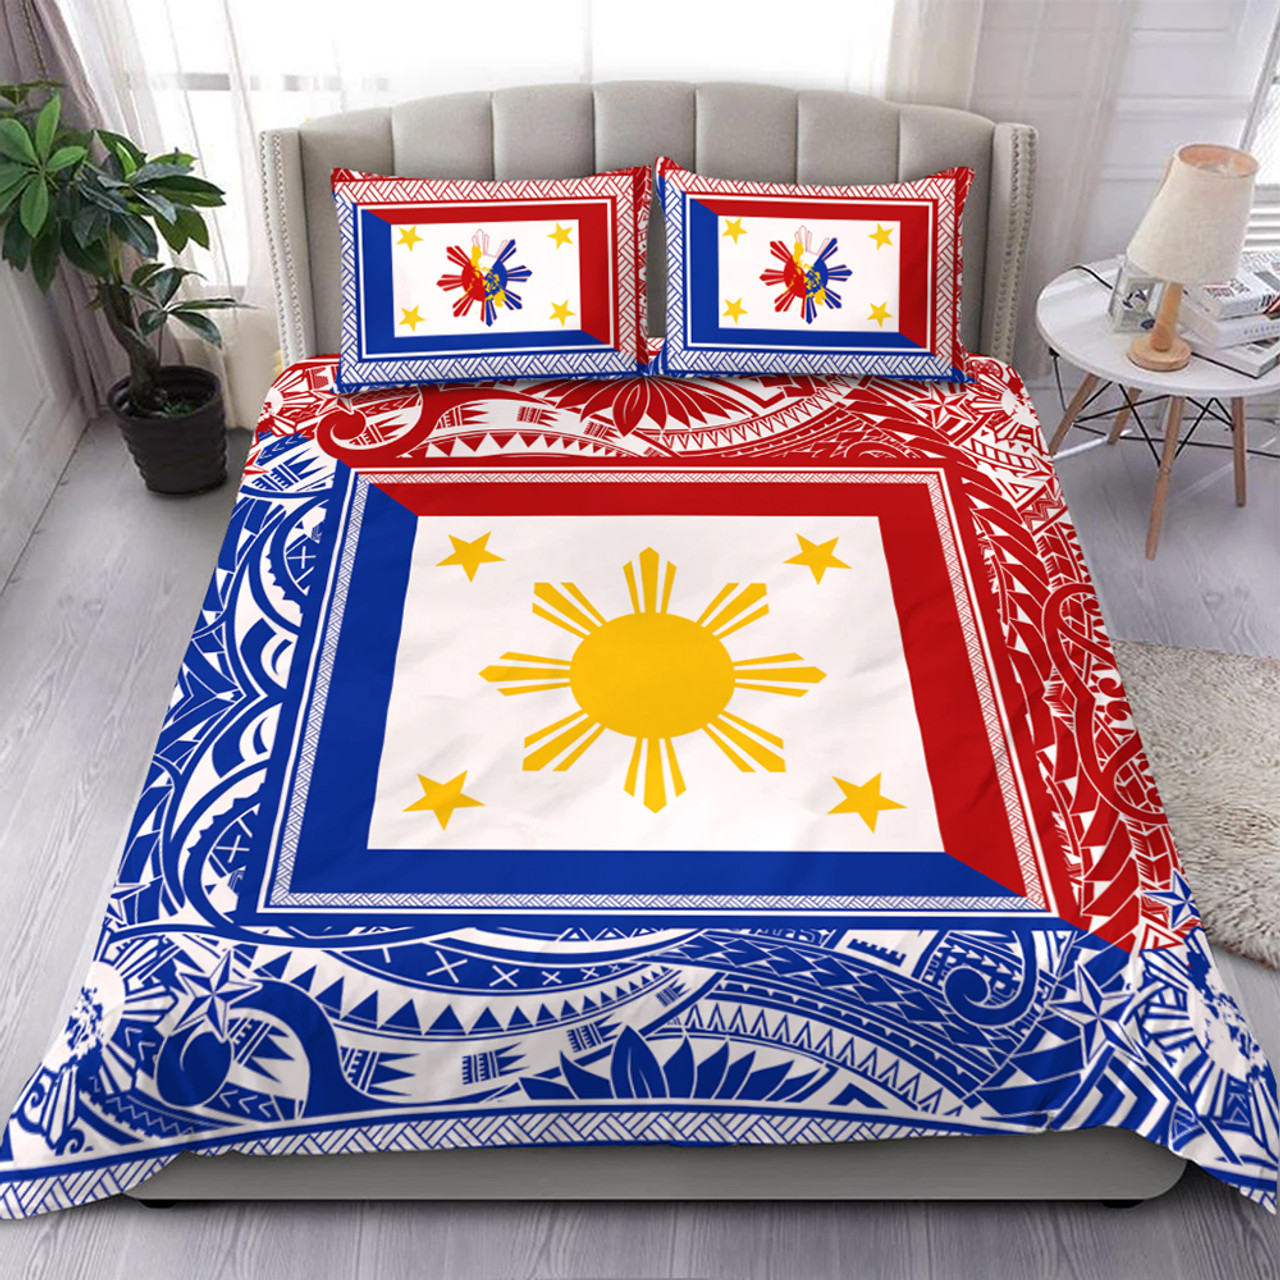 Philippines Bedding Set Polynesian Star Coat Of Arms